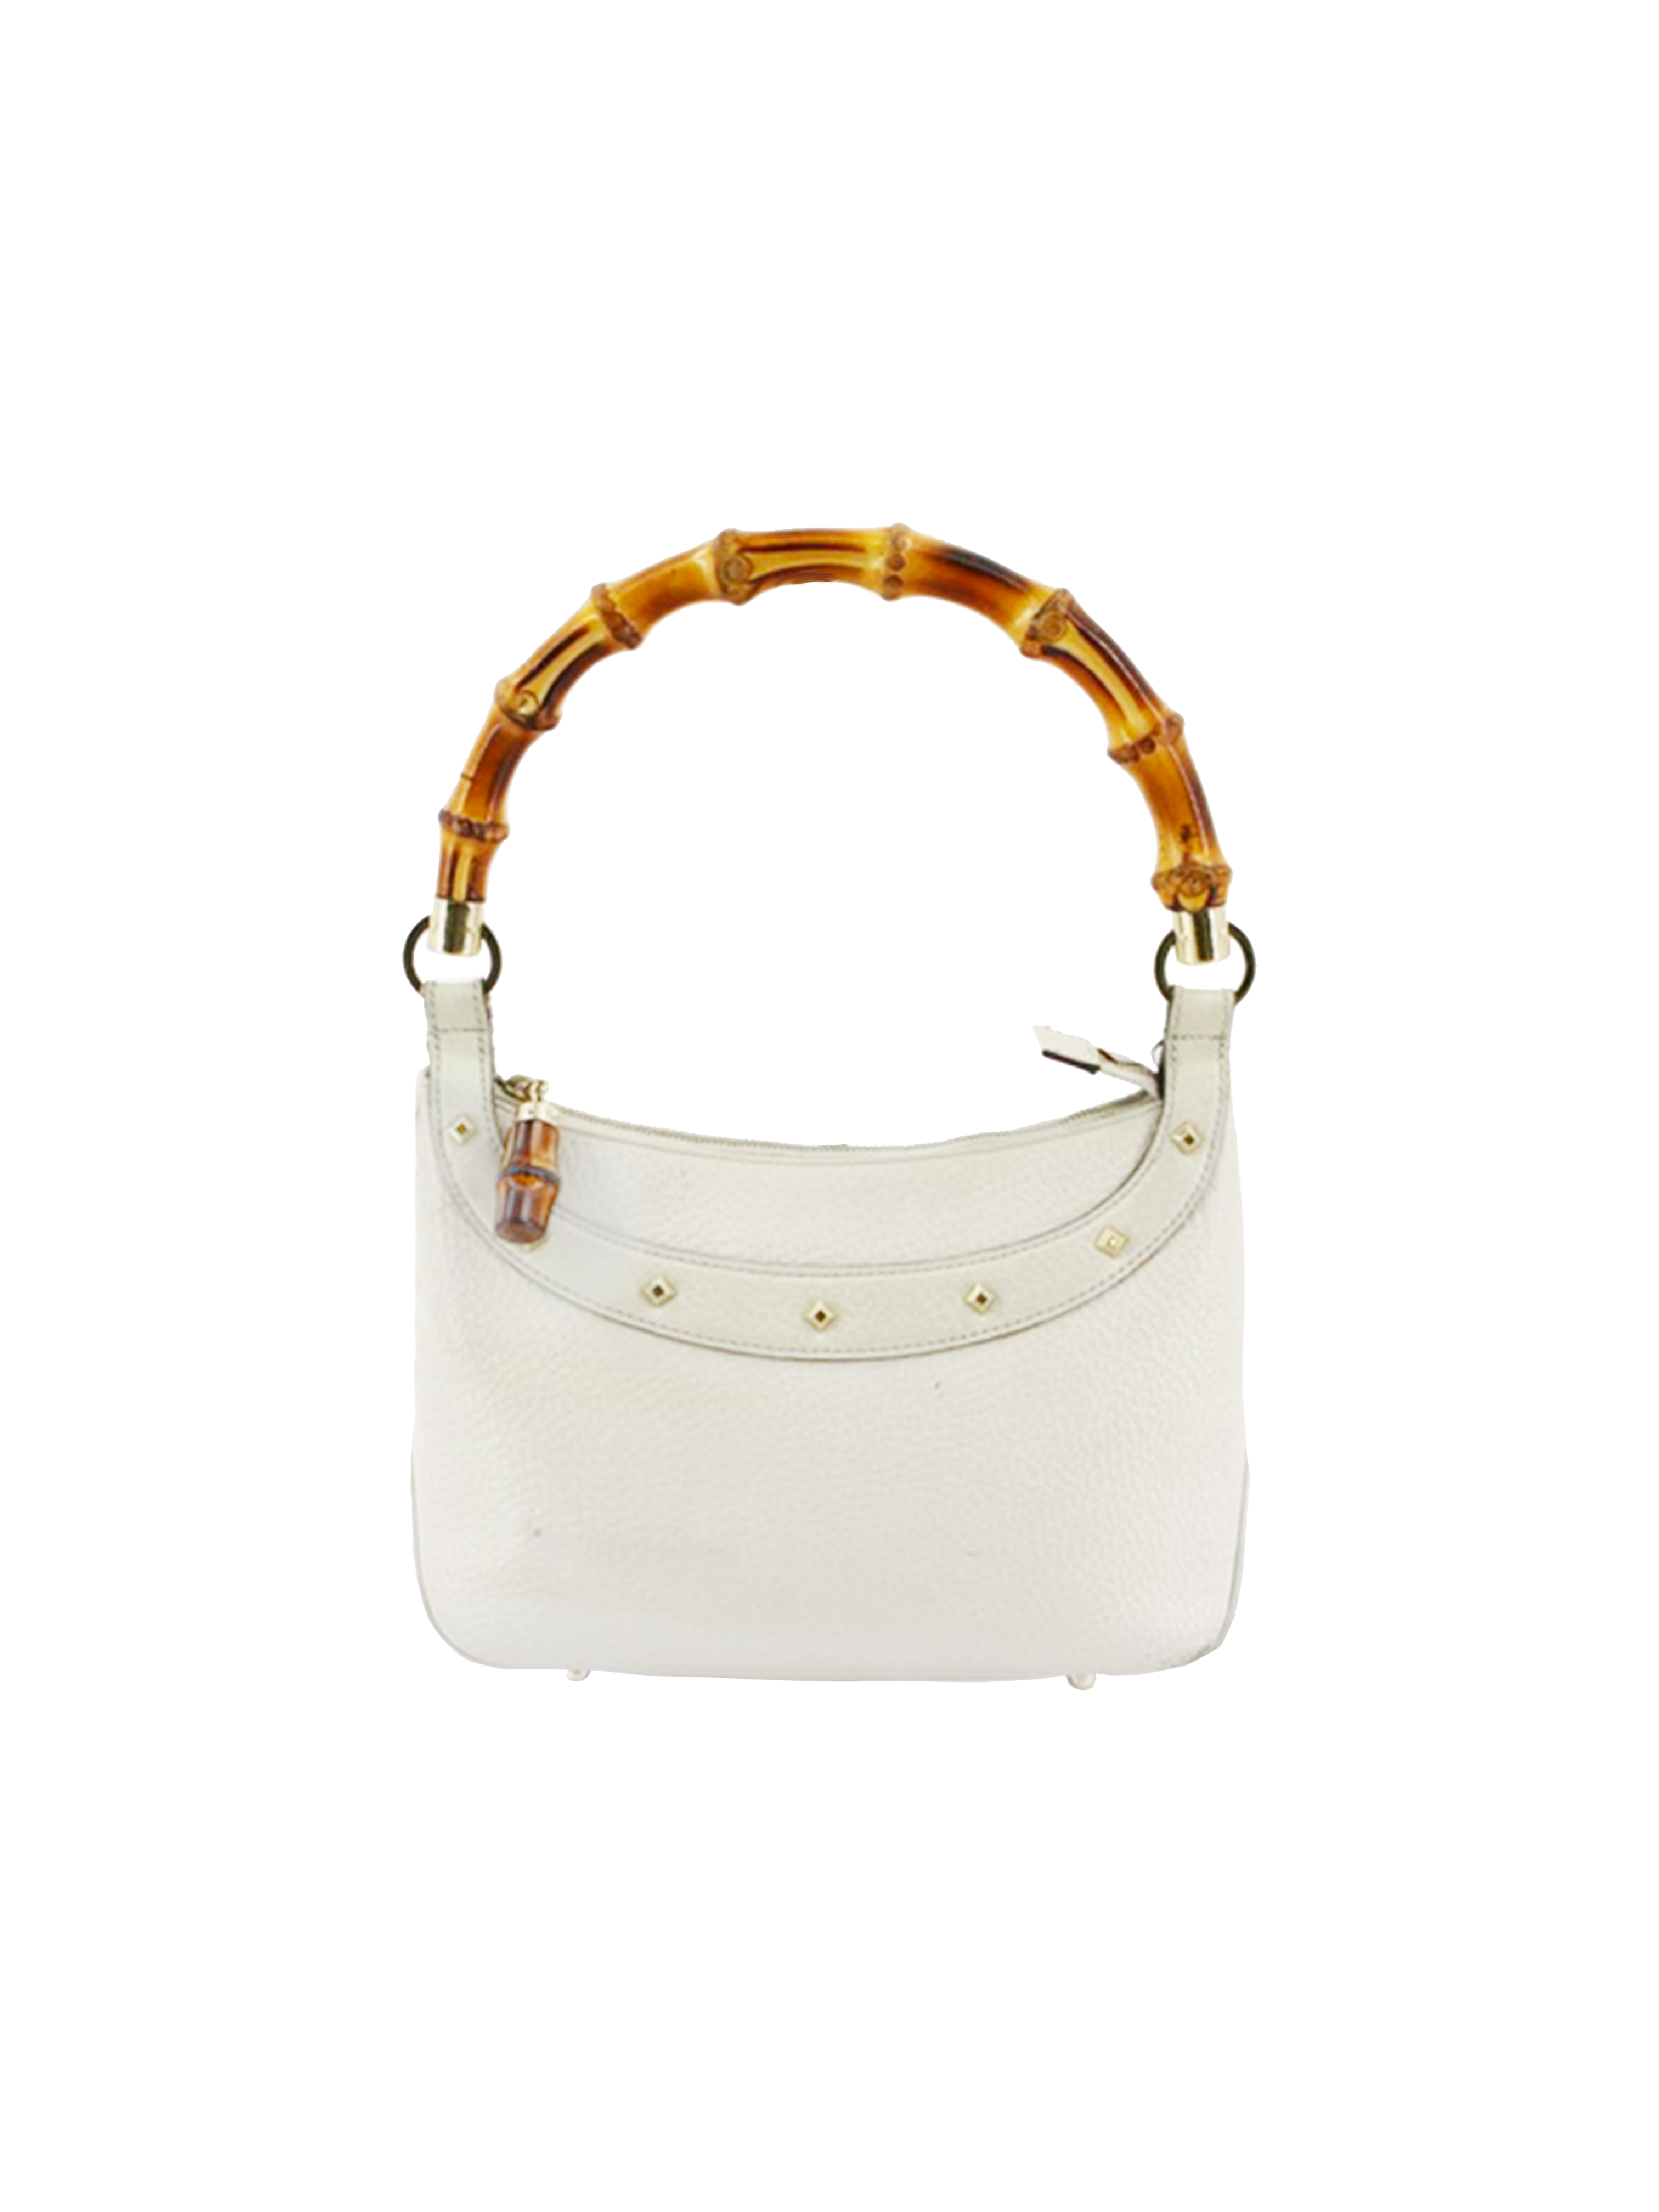 Gucci Bamboo 2000s White Round Handle Bag